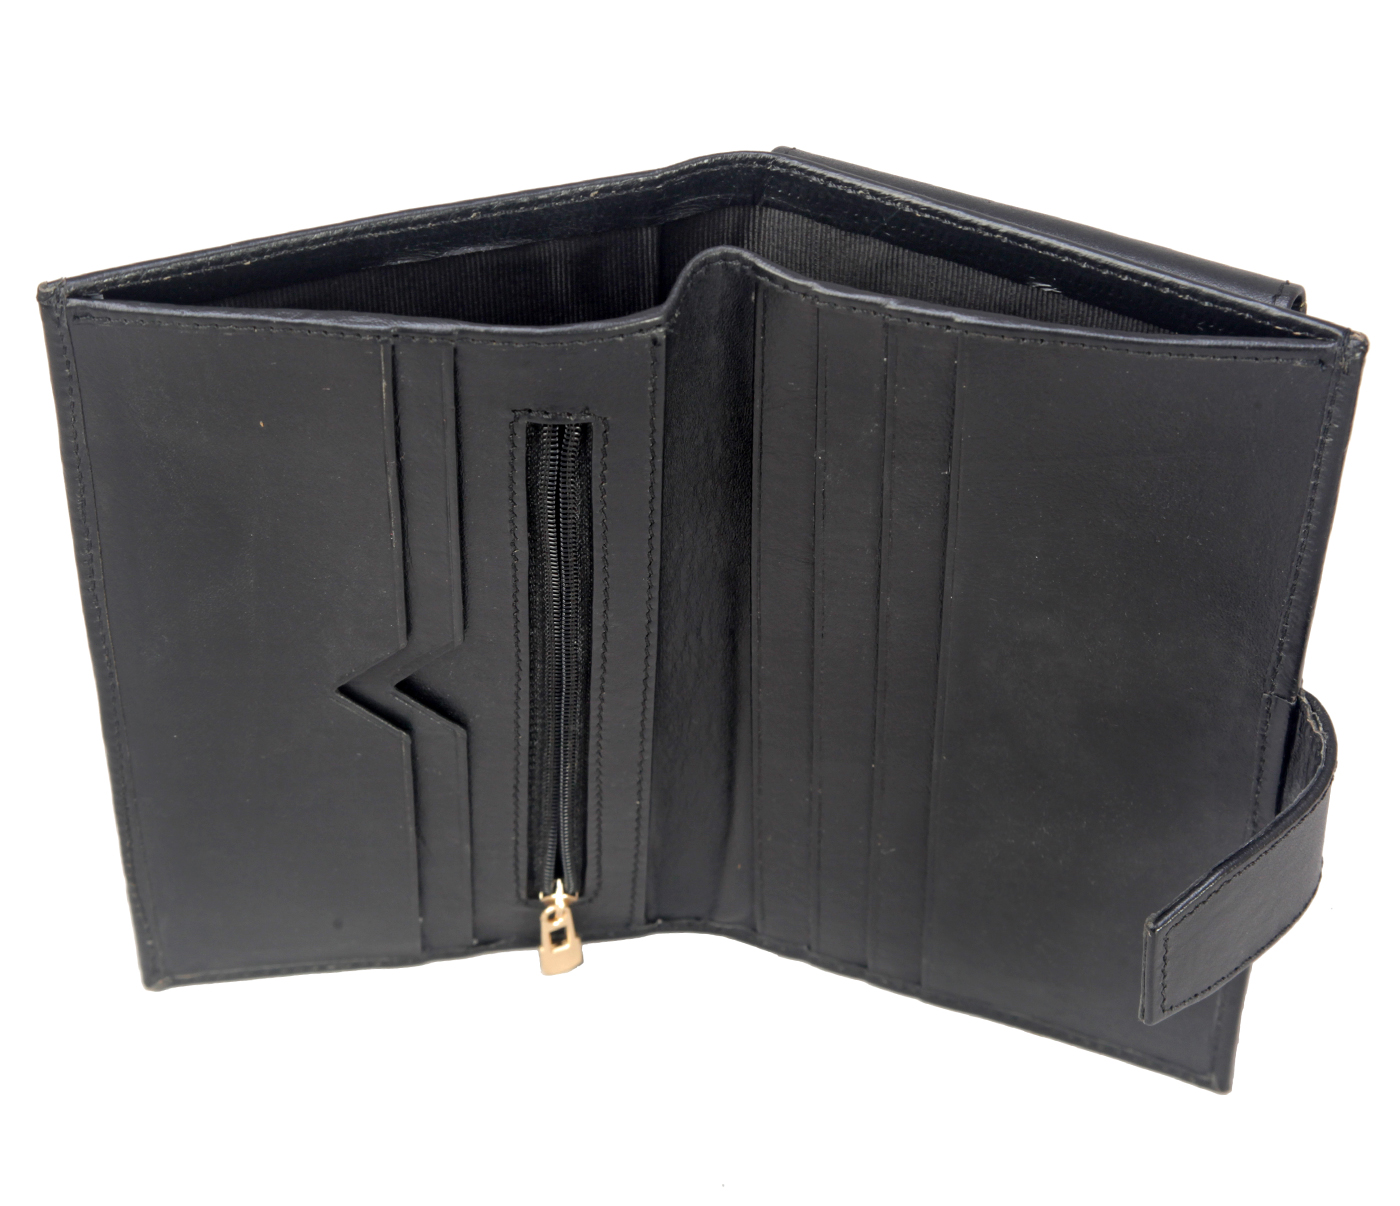 Wallet-Cameron-Women's wallet with mobile holder in Genuine Leather - Black